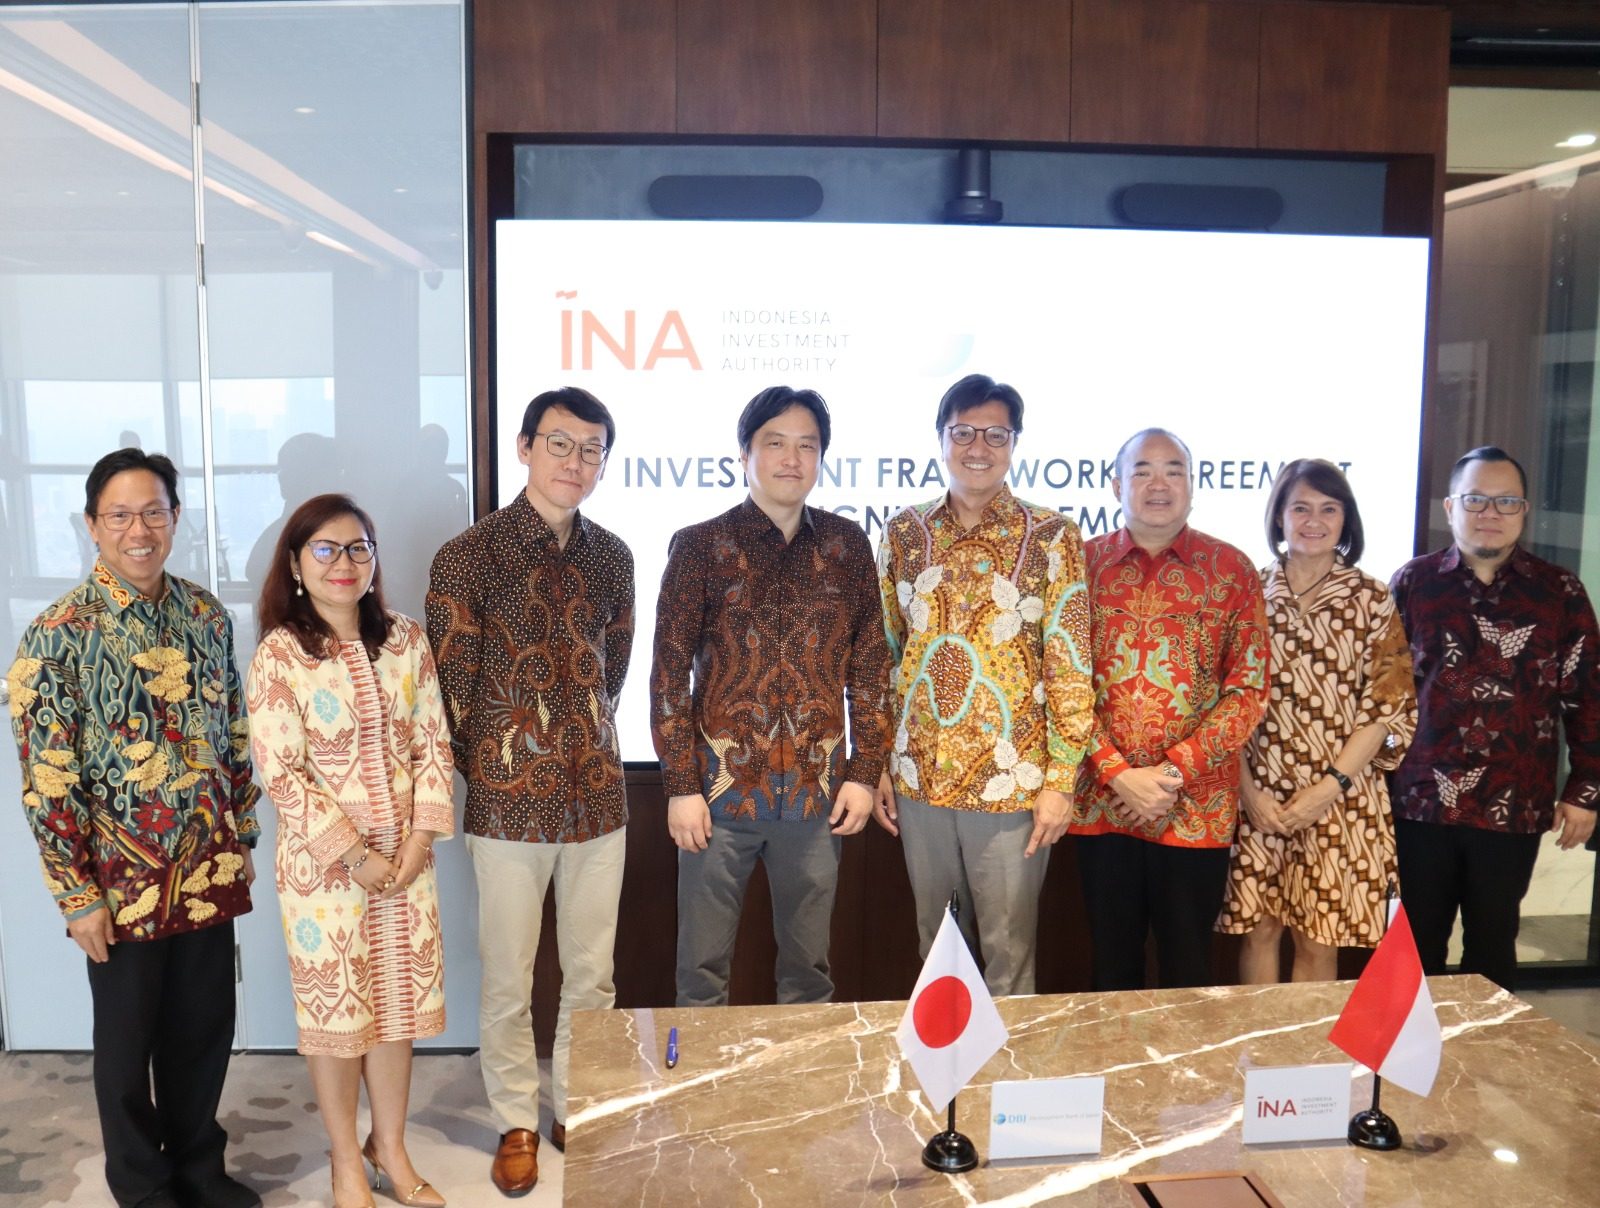 Asia Digest: Indonesia's INA, DBJ announce collaboration; SC Ventures, SBI Holdings set up JV